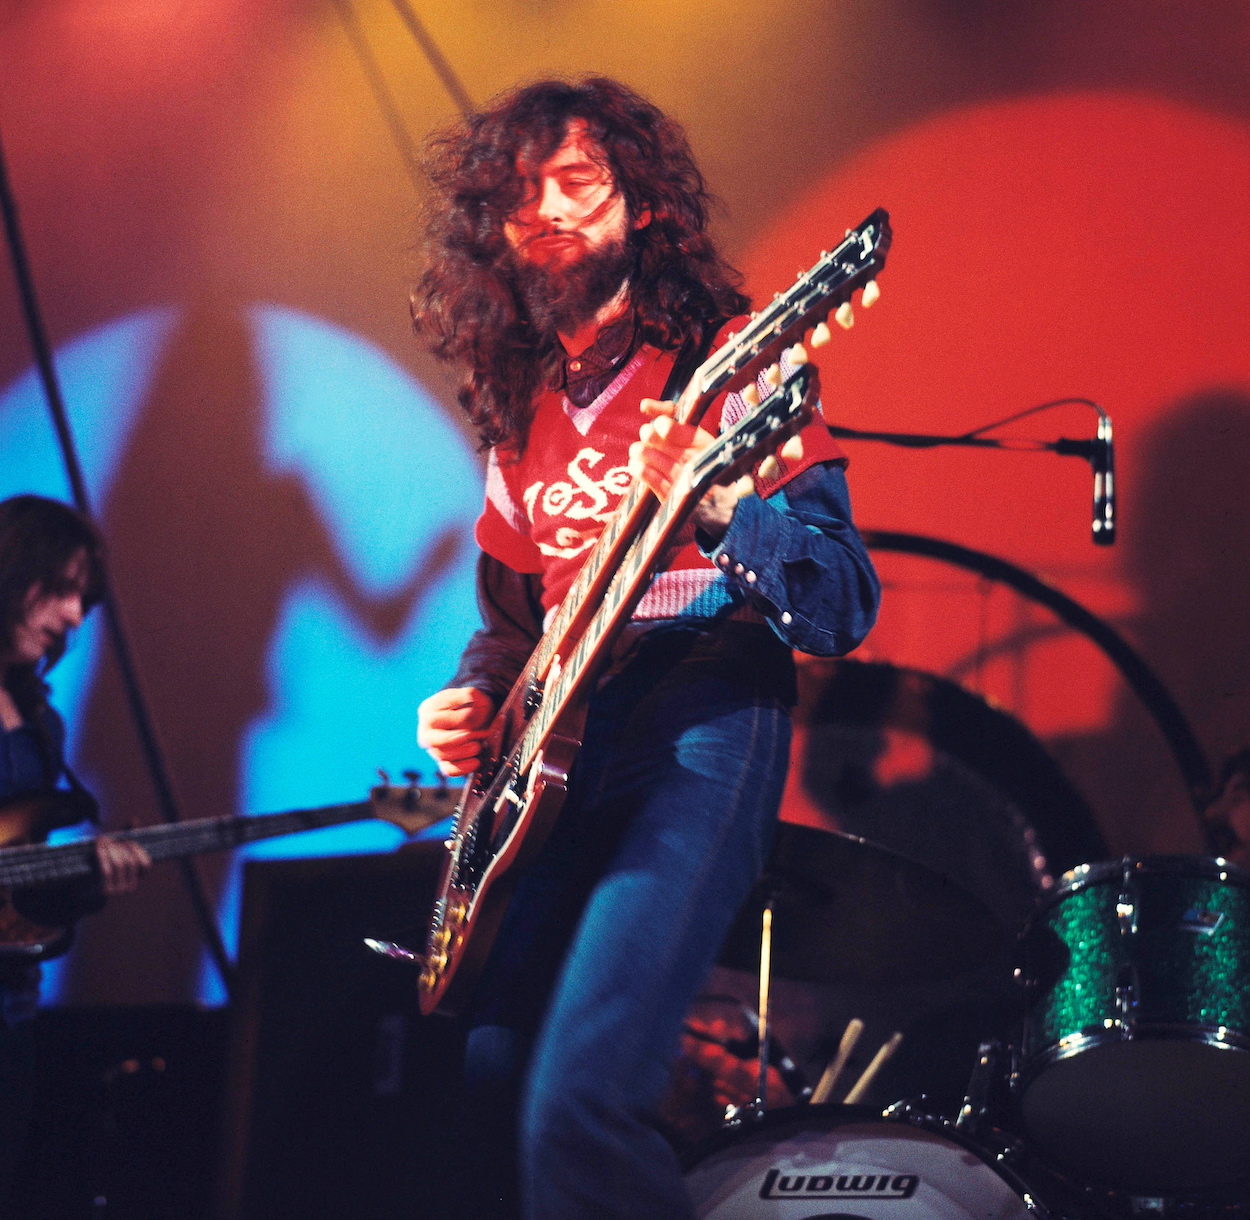 Led Zeppelin guitarist Jimmy Page plays his double-necked Gibson during a 1971 concert in London. Page once described the "everlasting quality" that makes 'Stairway to Heaven' an enduring classic.